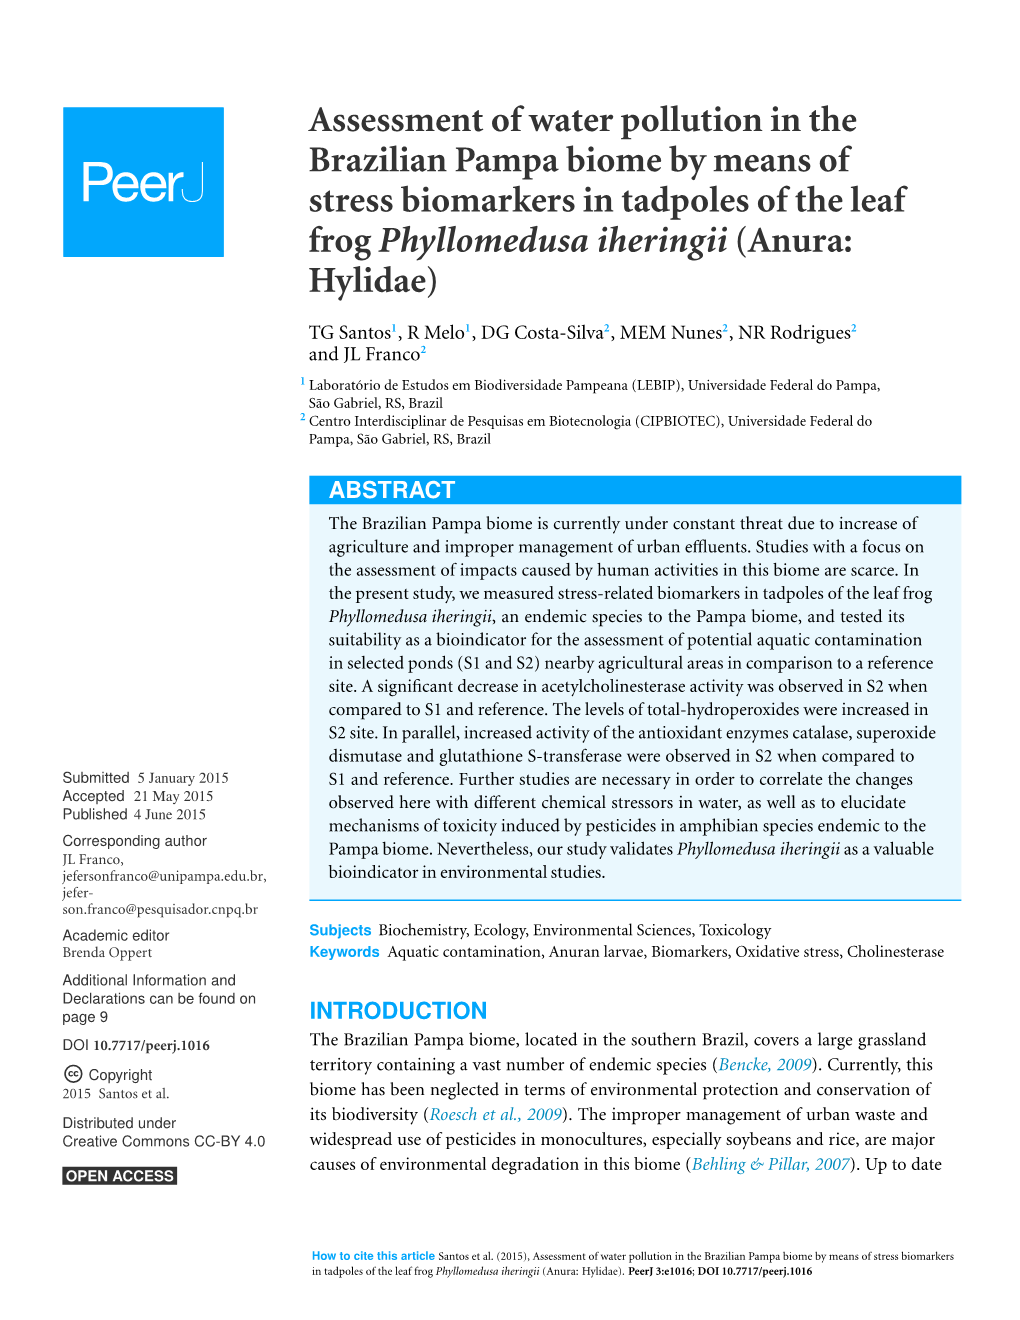 Assessment of Water Pollution in the Brazilian Pampa Biome by Means of Stress Biomarkers in Tadpoles of the Leaf Frog Phyllomedusa Iheringii (Anura: Hylidae)